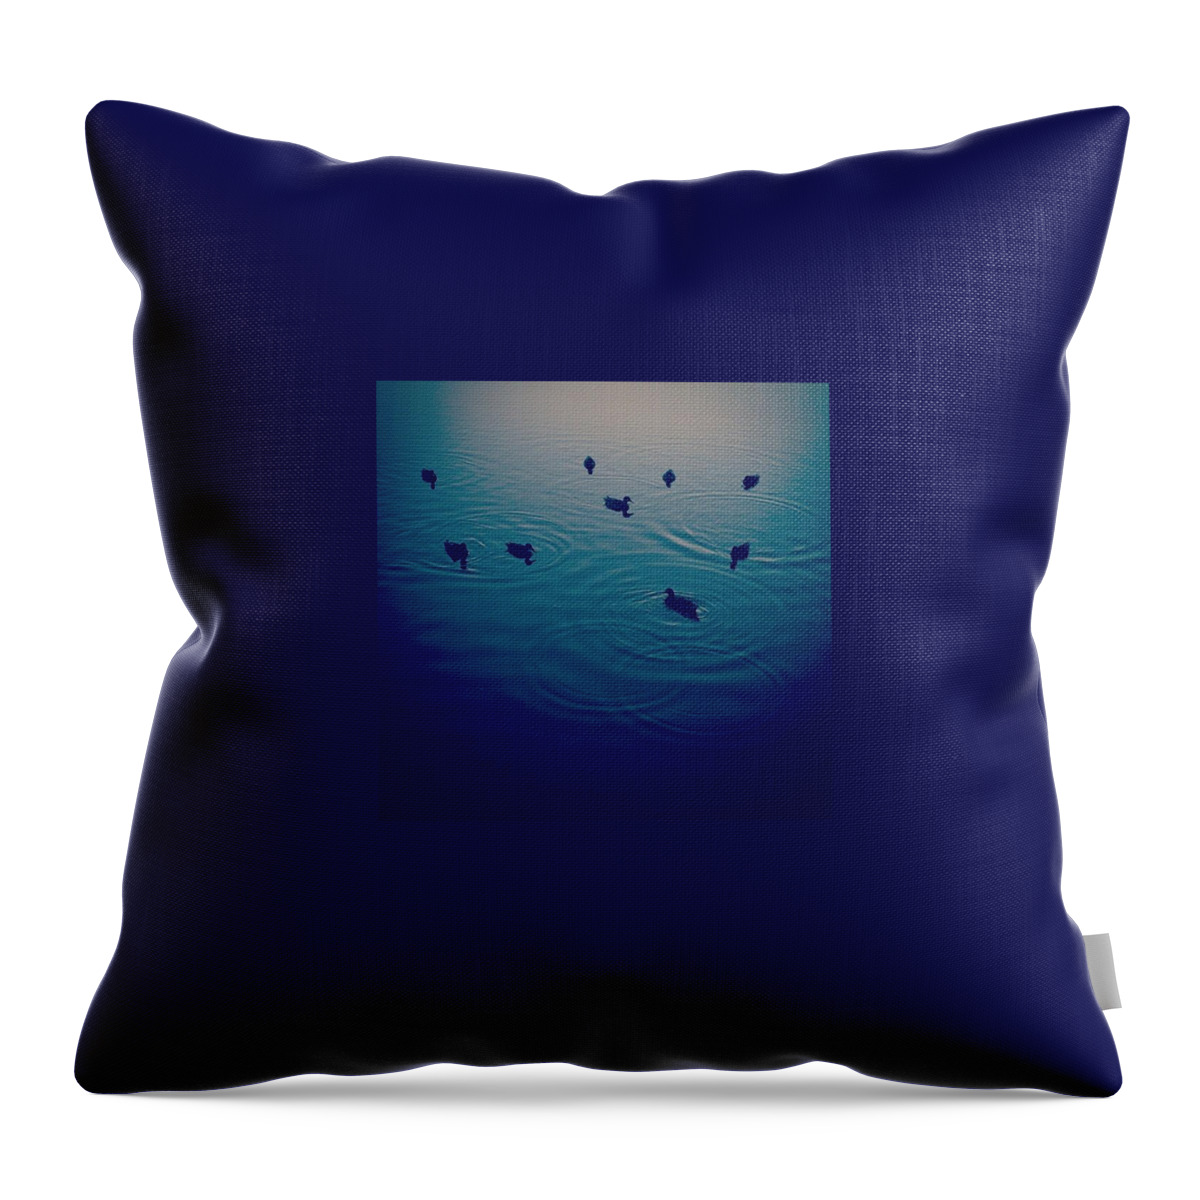 Water Throw Pillow featuring the photograph #lake #pond #water #ducks by Craig Mckirdy